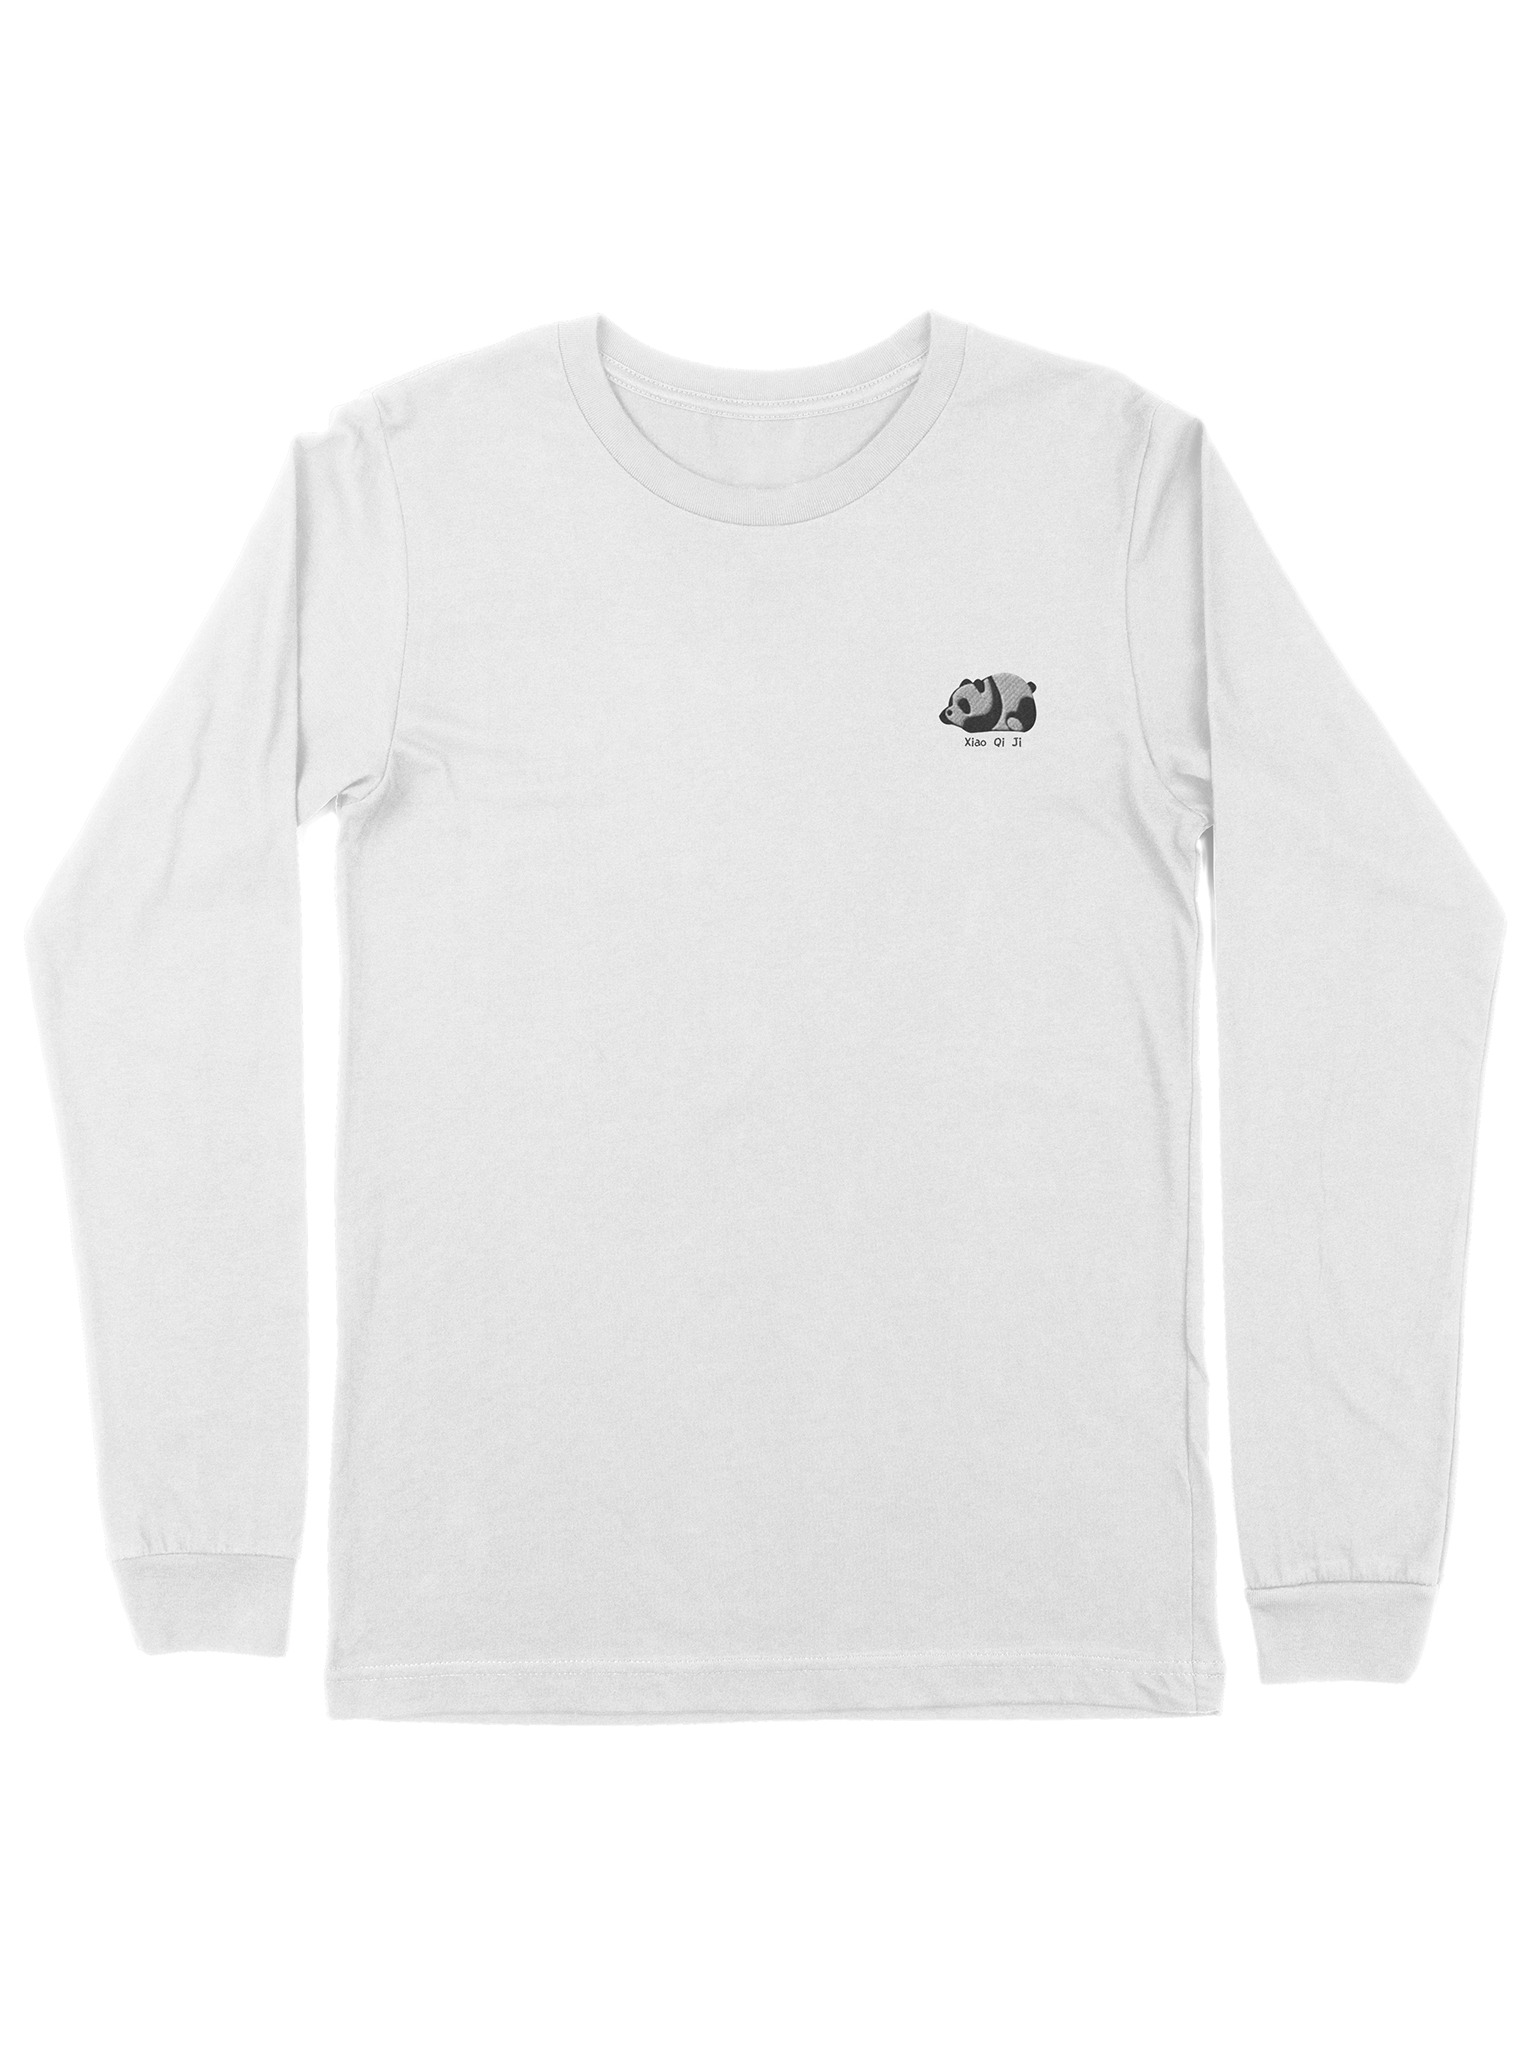 Embroidered Long Sleeve Cub Tee